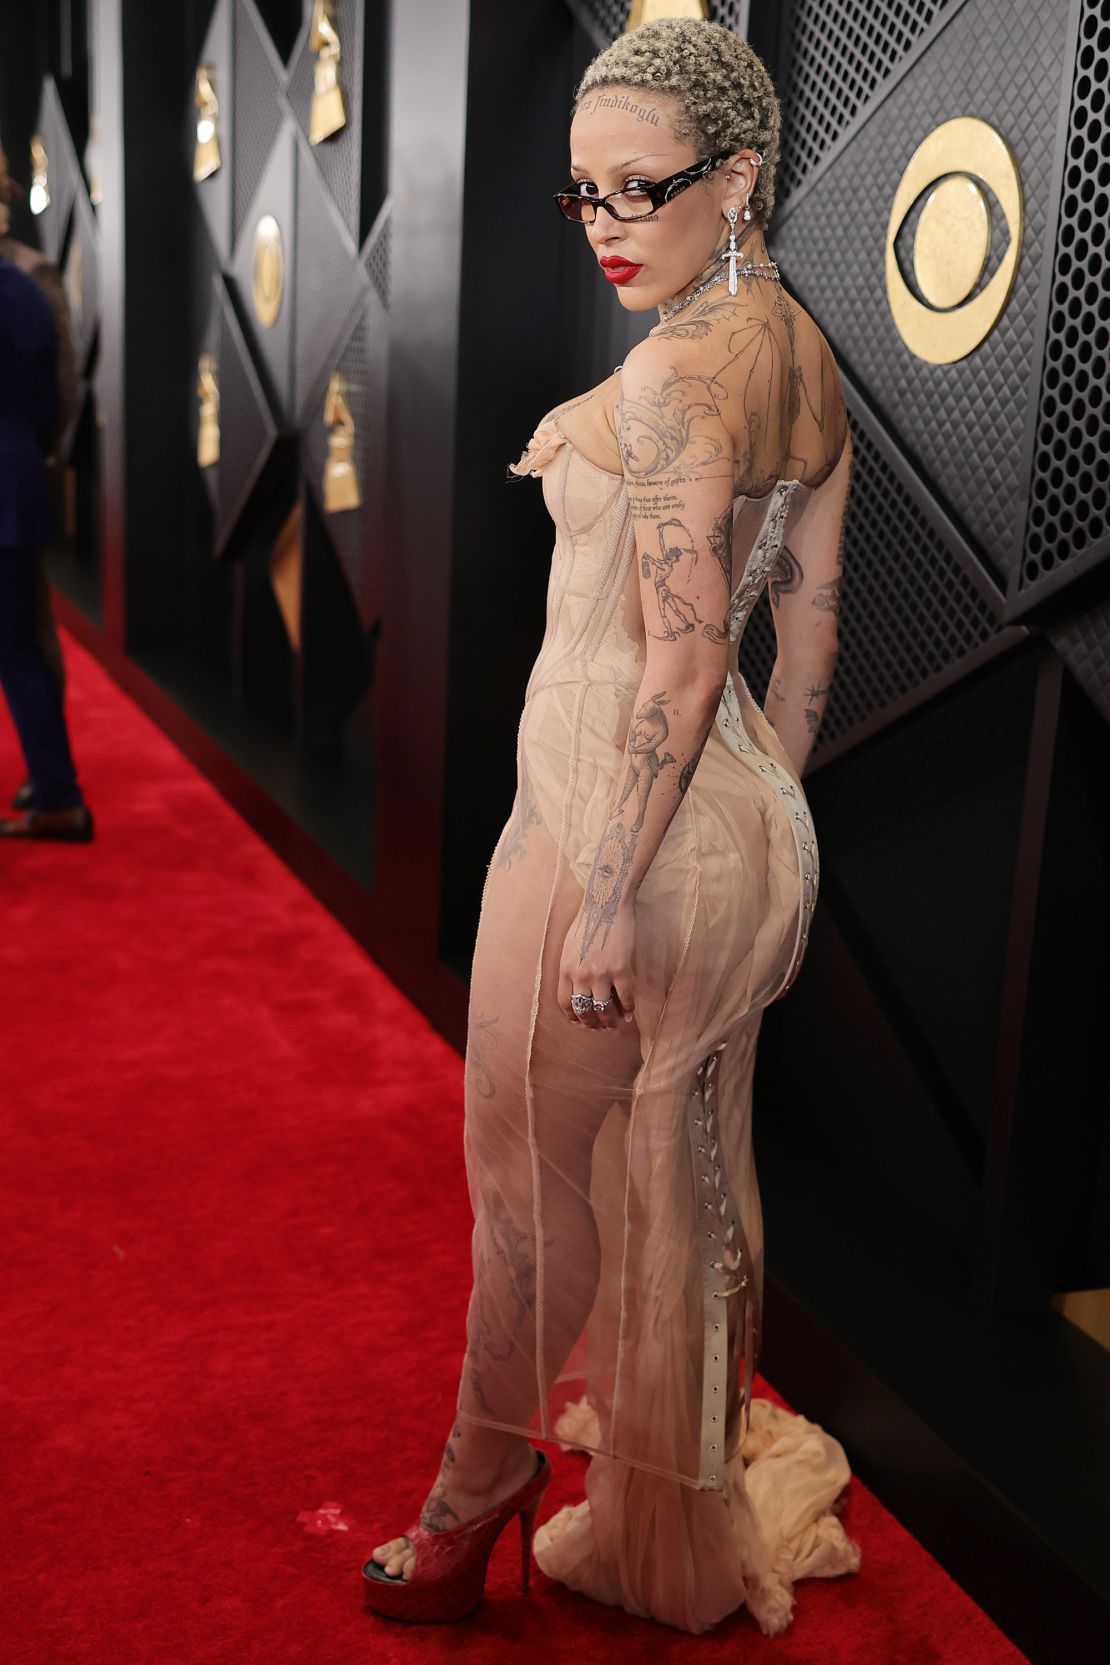 Doja Cat was covered in temporary tattoos at the Grammy awards on Sunday in Los Angeles.